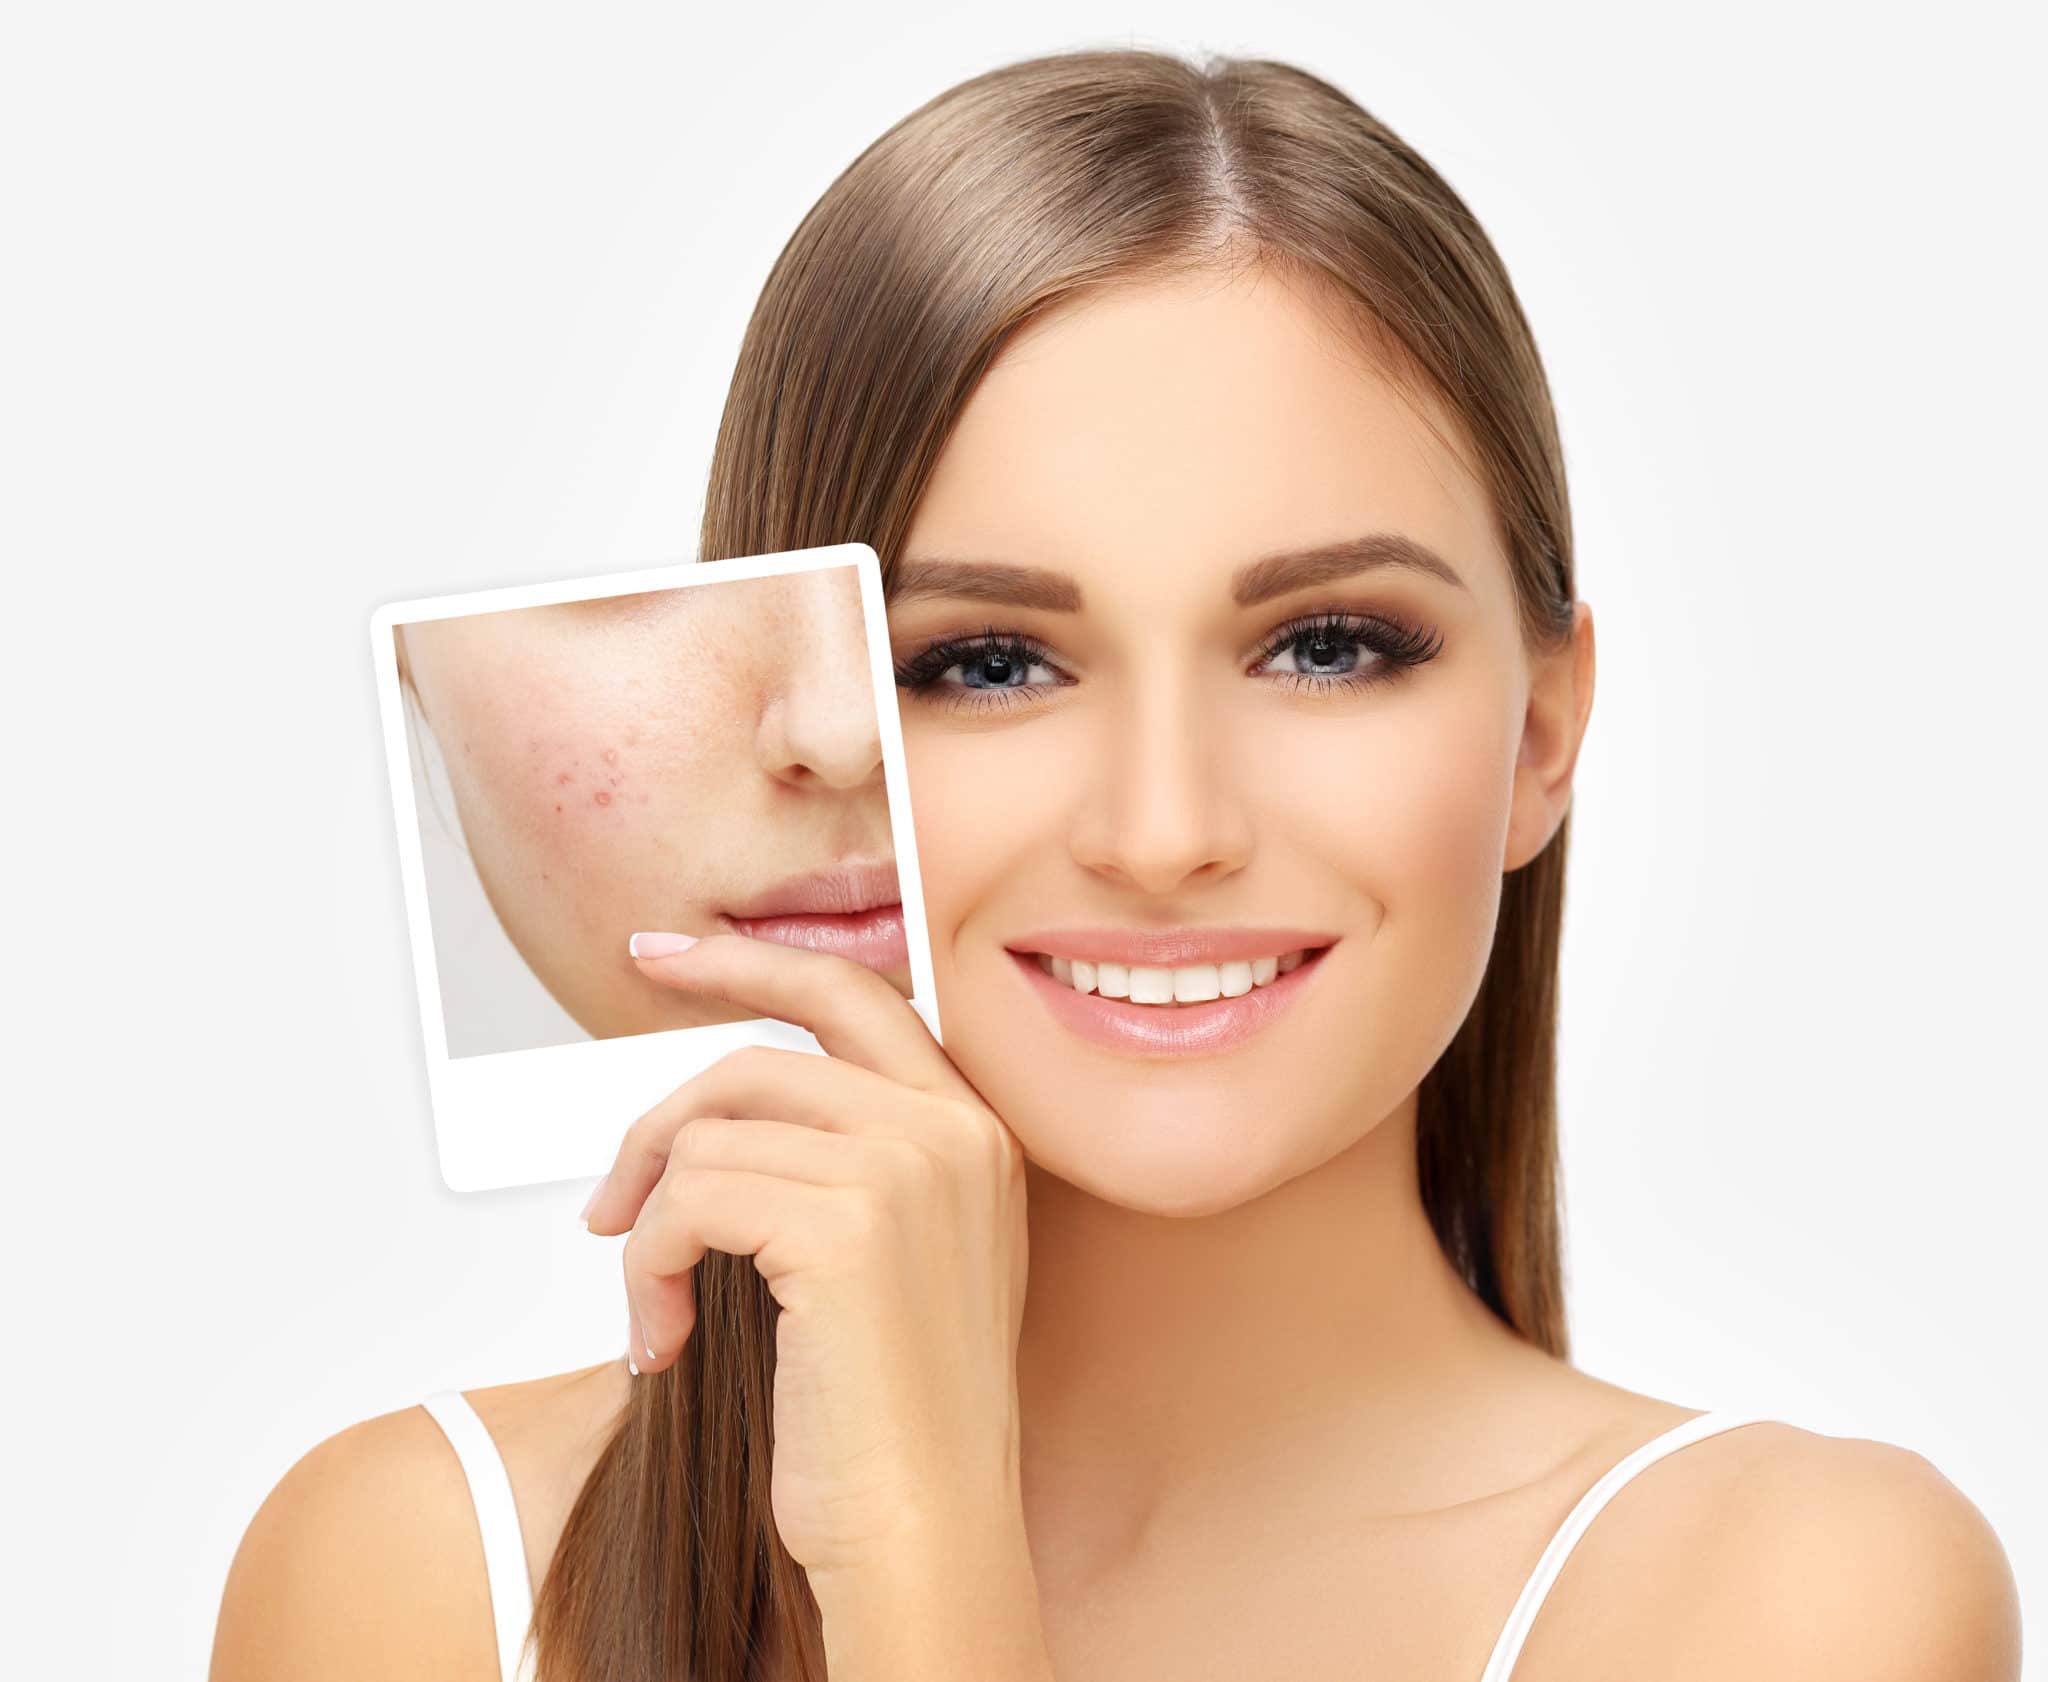 Portrait of girl with clear skin holding a picture of herself with acne problems.